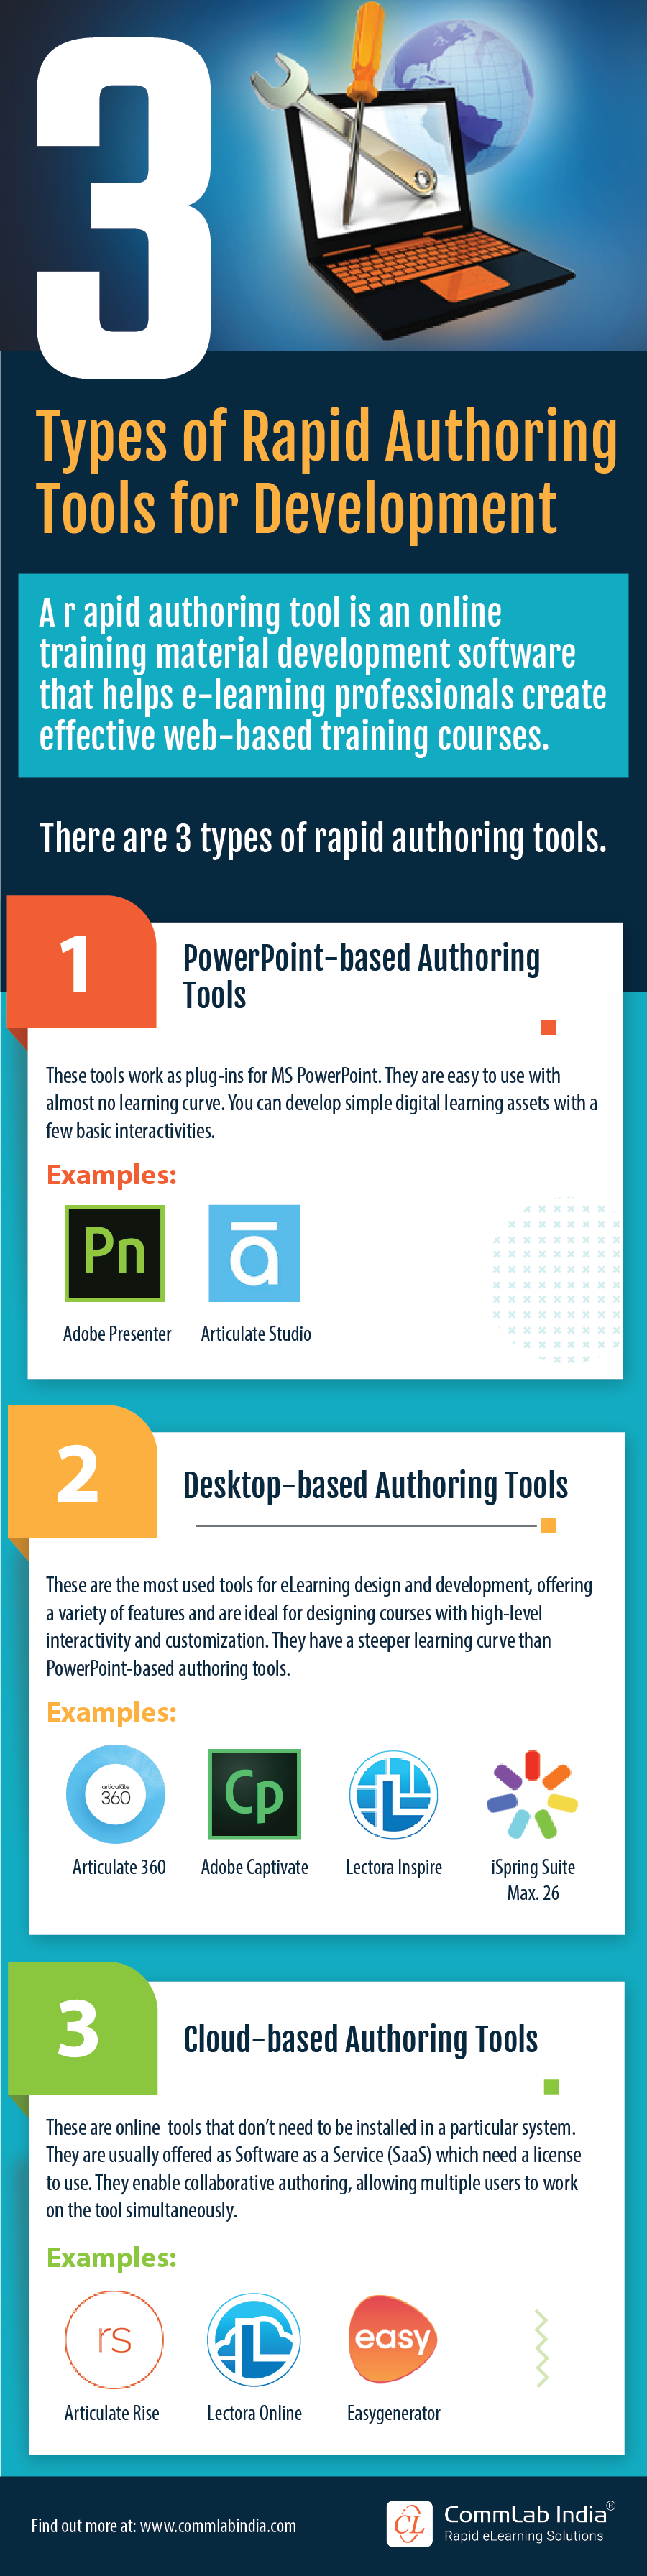 Types of eLearning Authoring Tools